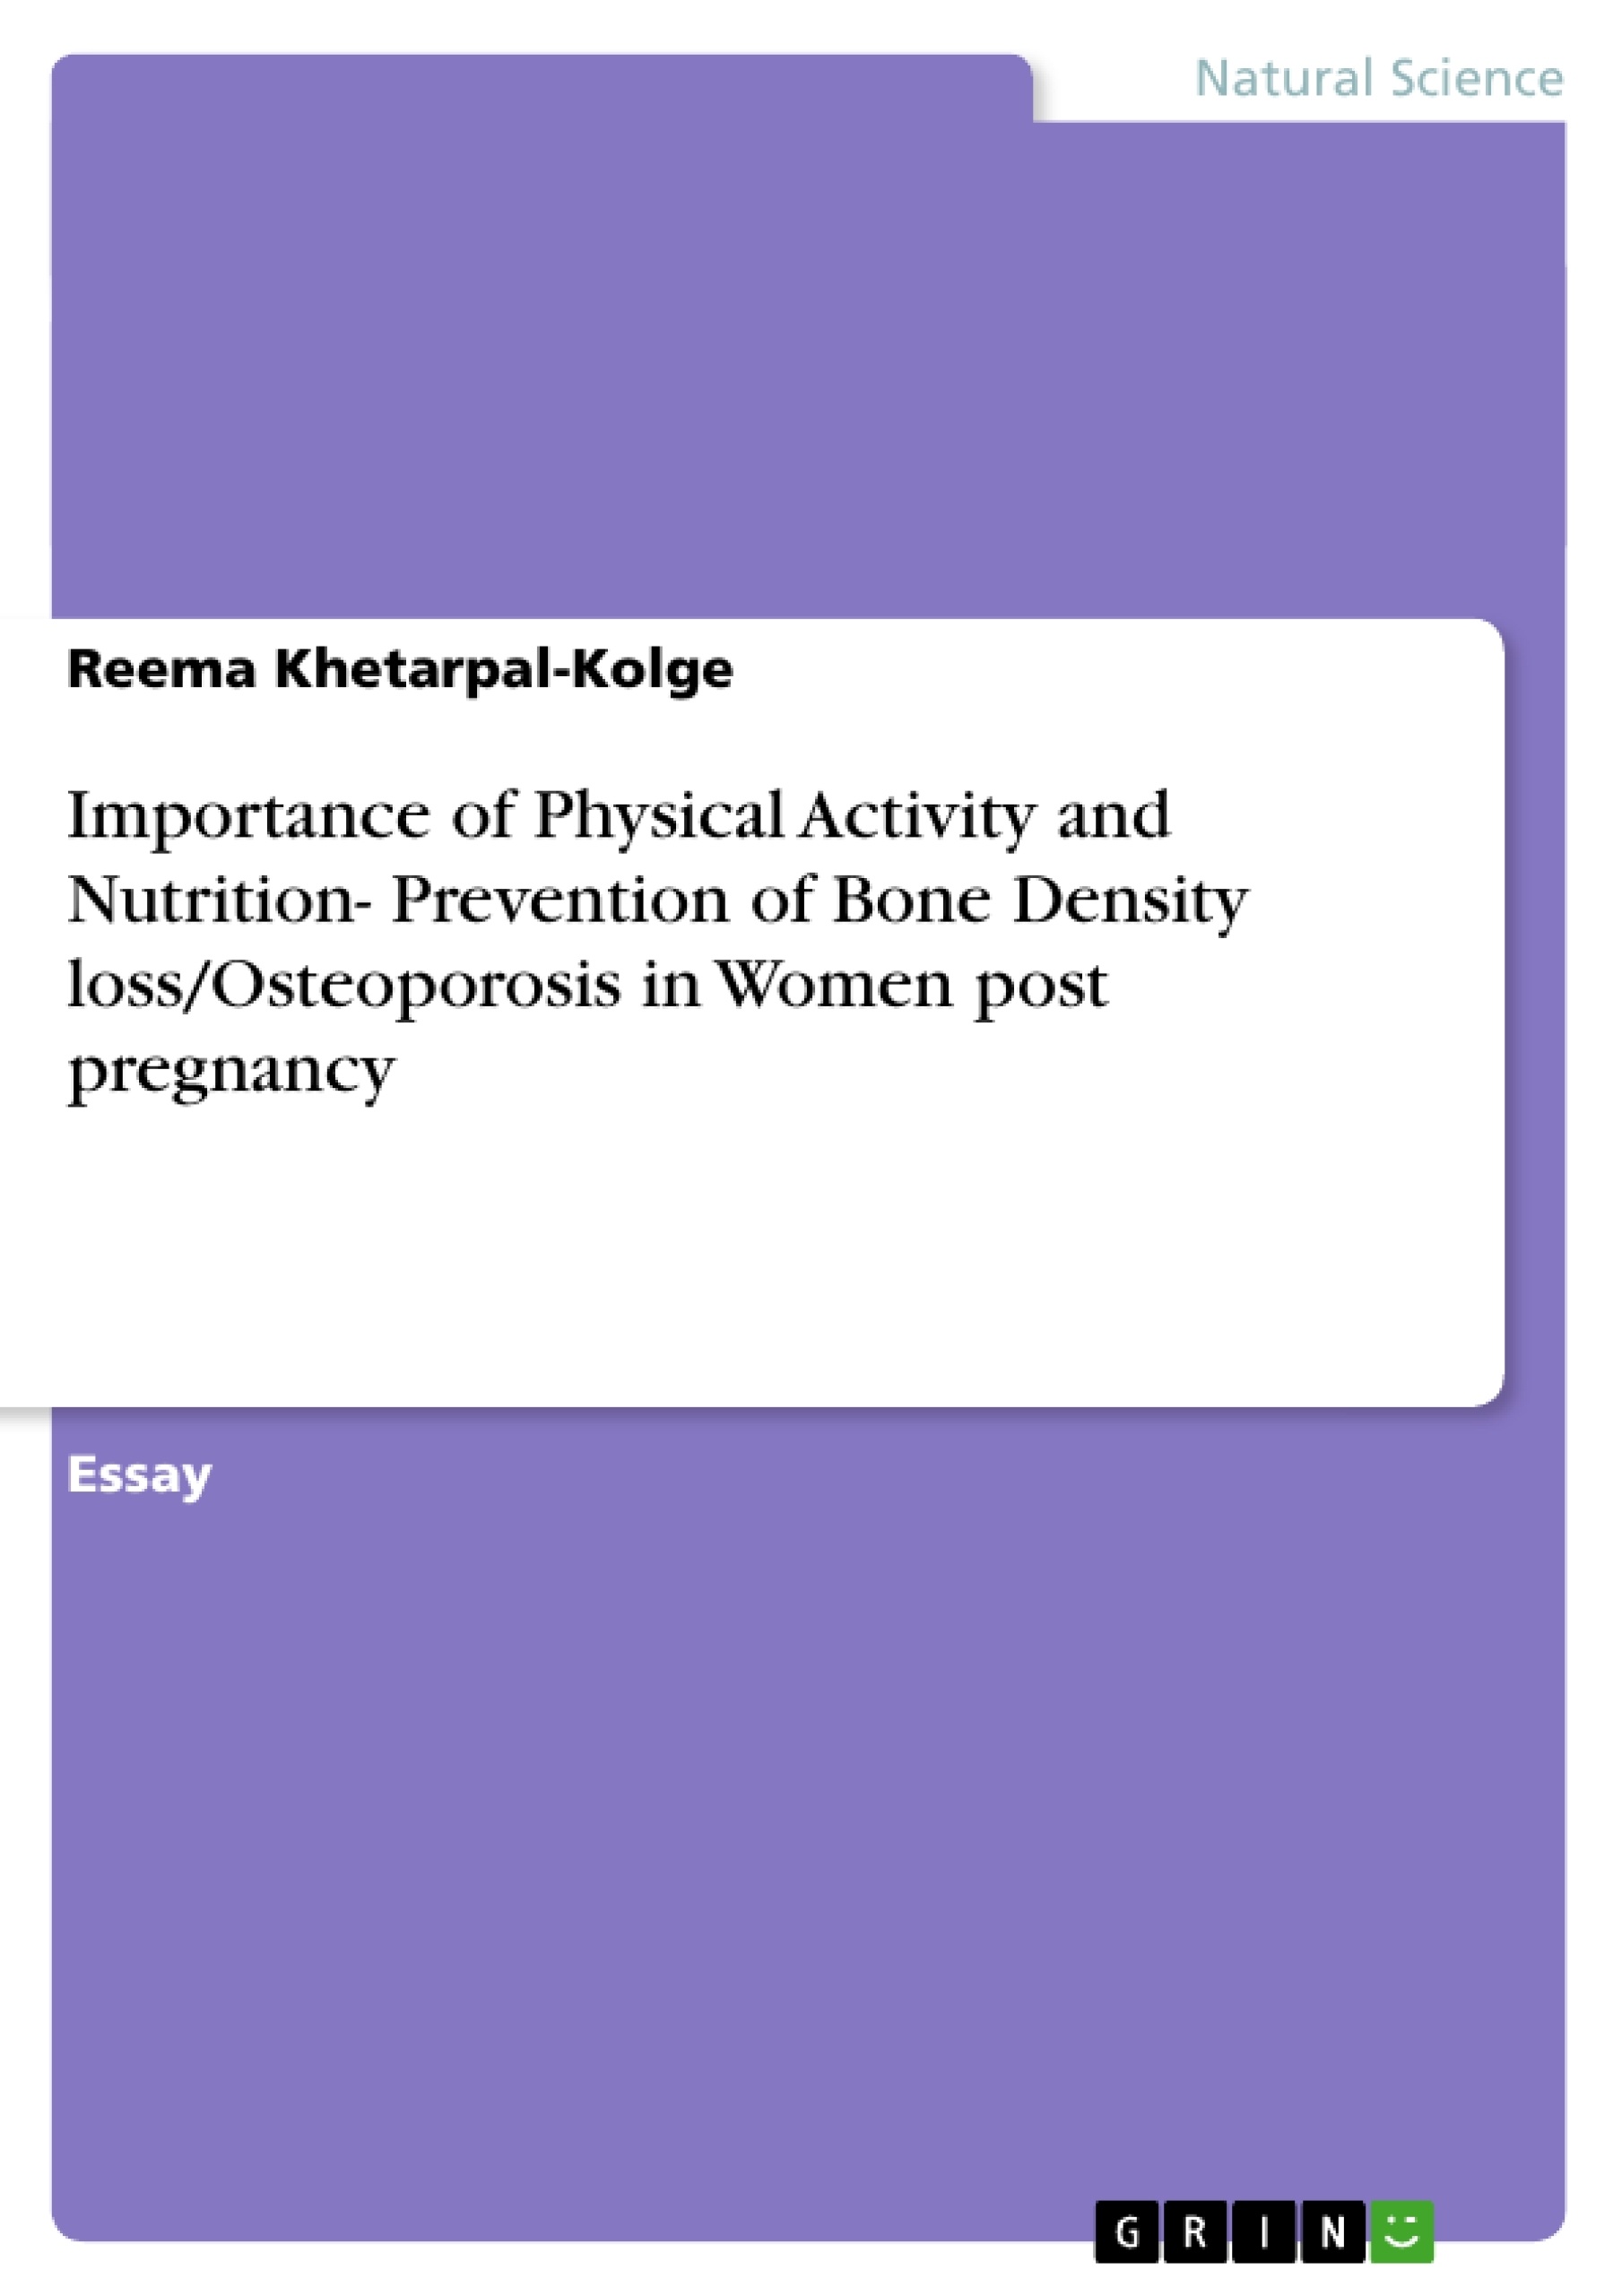 Titel: Importance of Physical Activity and Nutrition- Prevention of Bone Density loss/Osteoporosis in Women post pregnancy